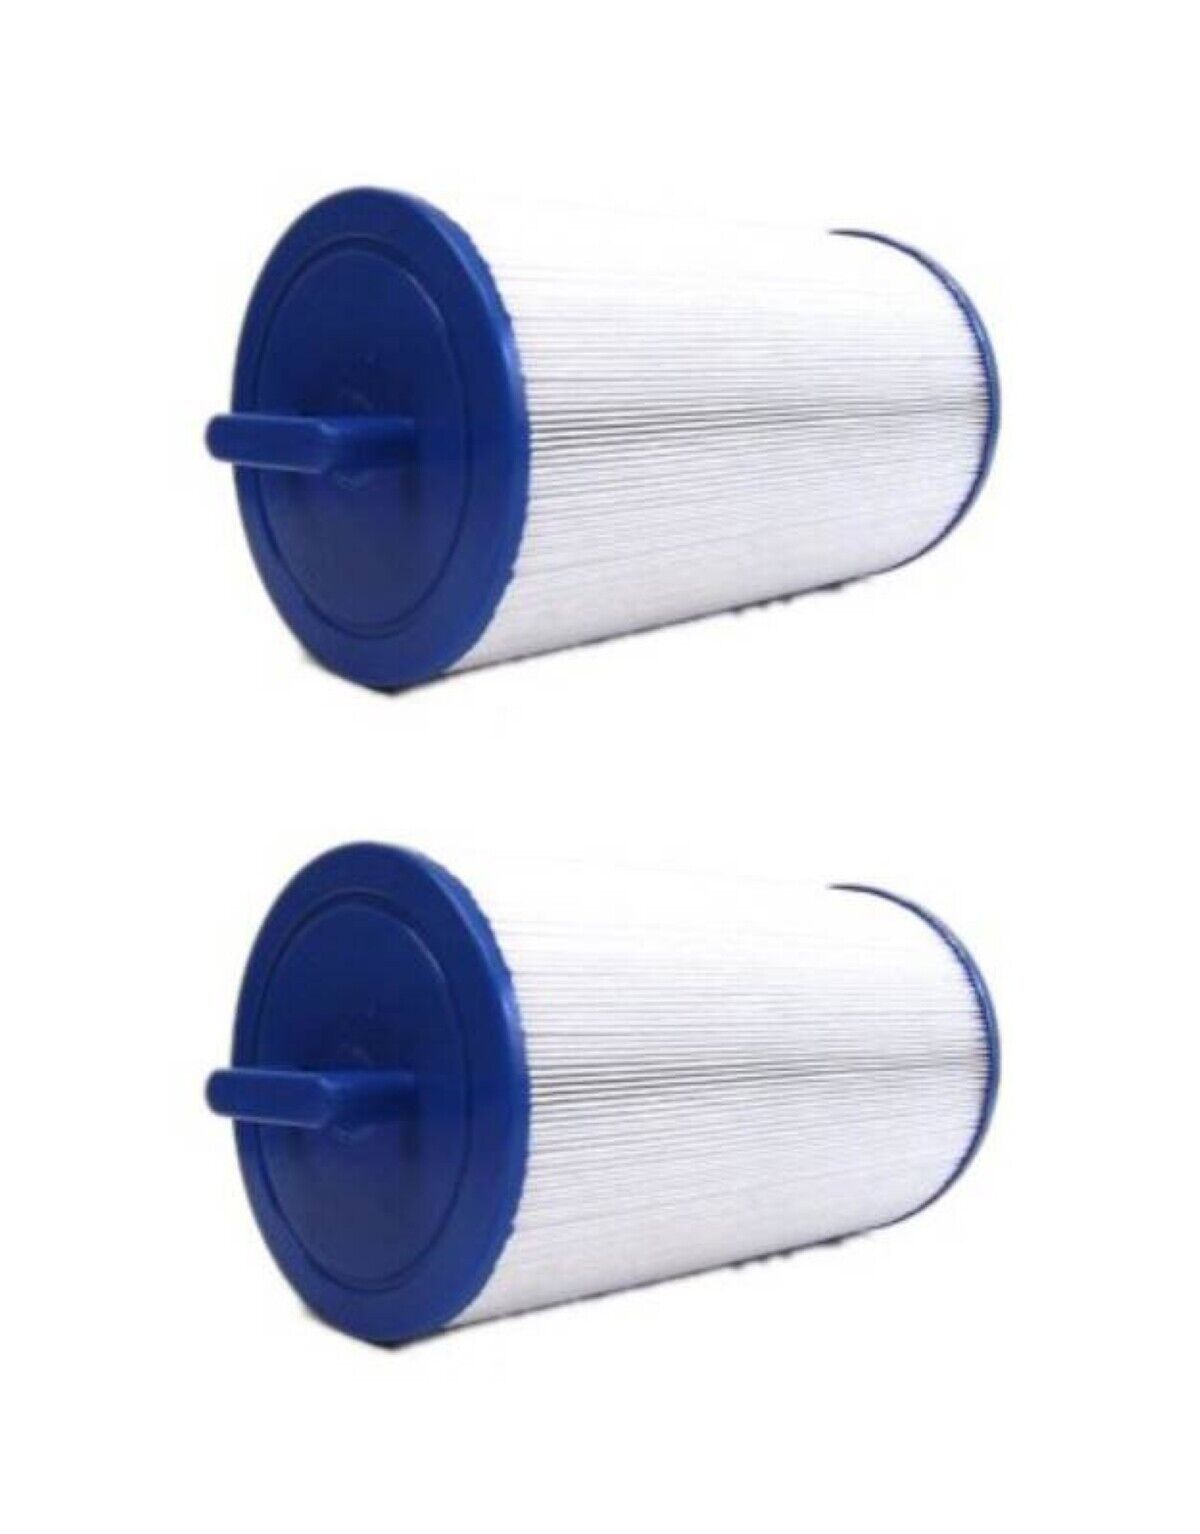 2 New Unicel 4CH-935 famous Spa Waterway OFFer Filter Ft C Sq 35 Replacement